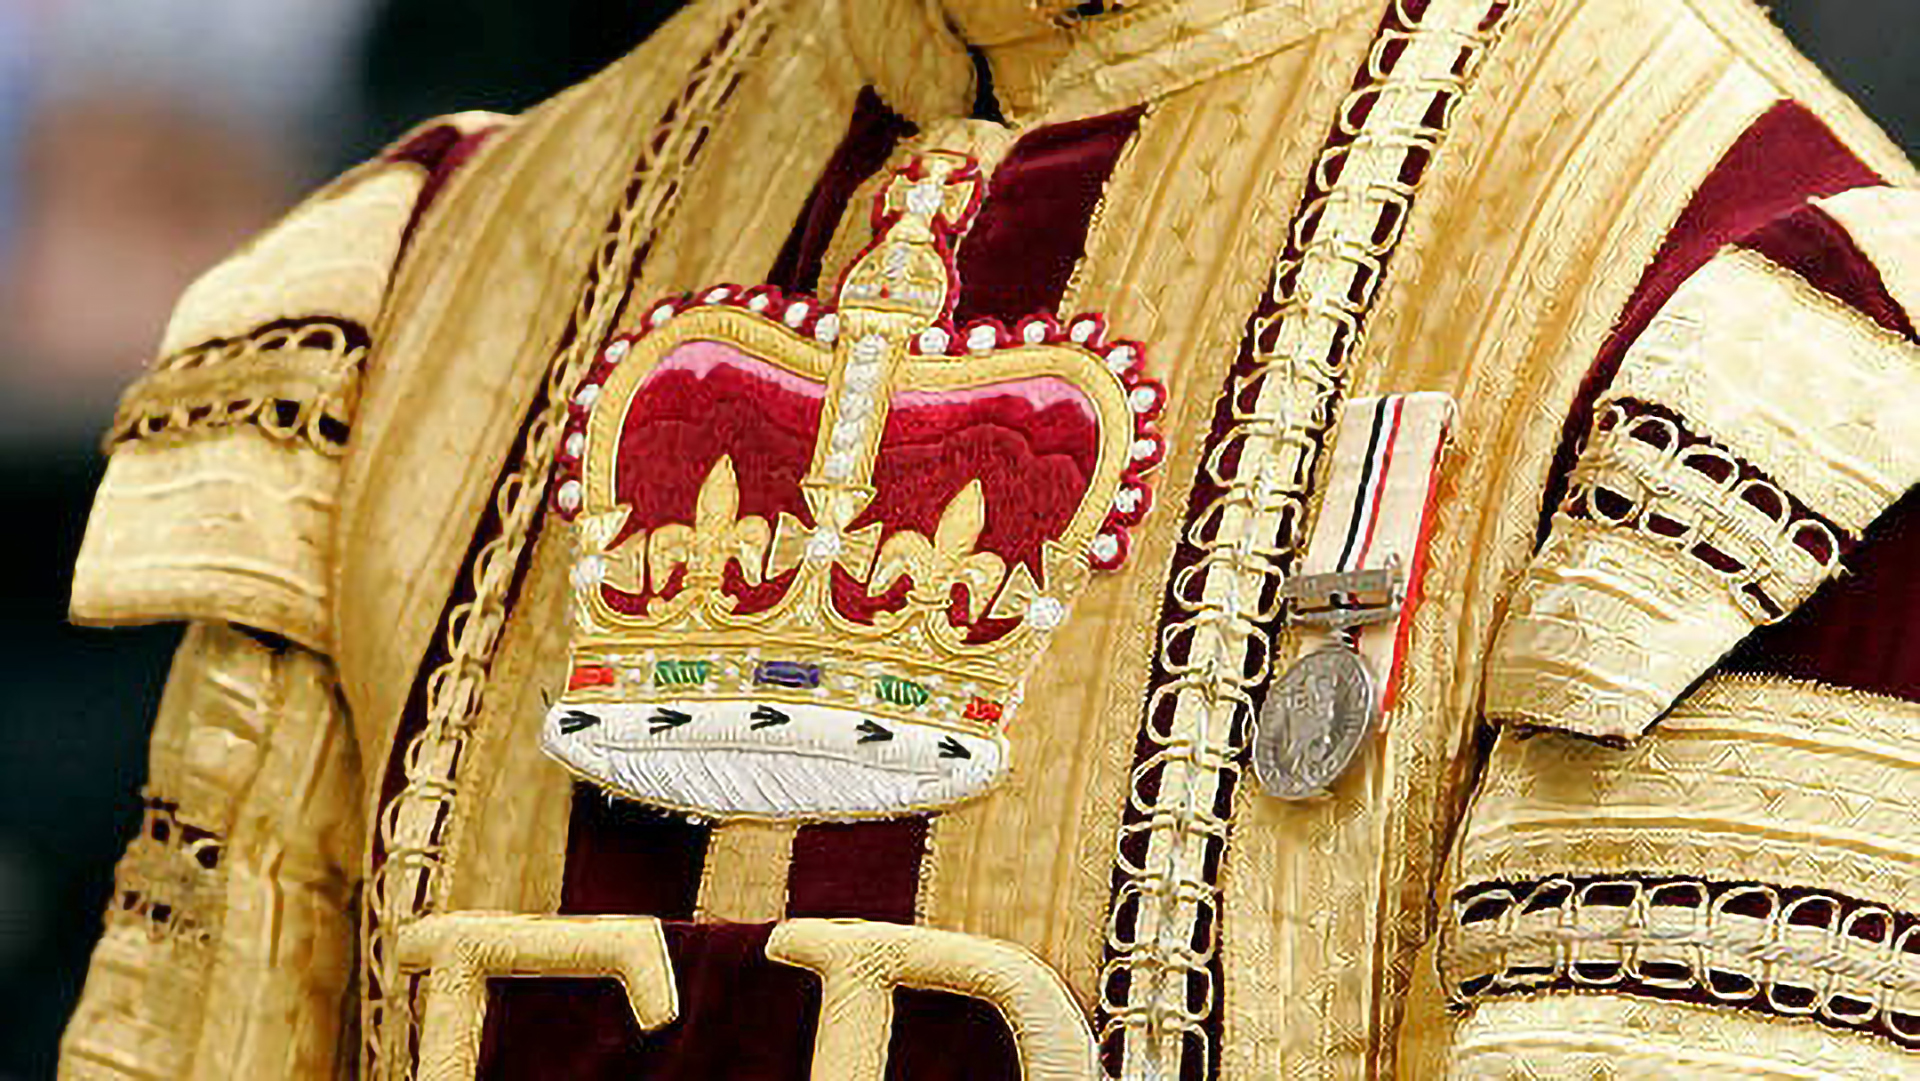 Gold uniform with Royal crown embroidery